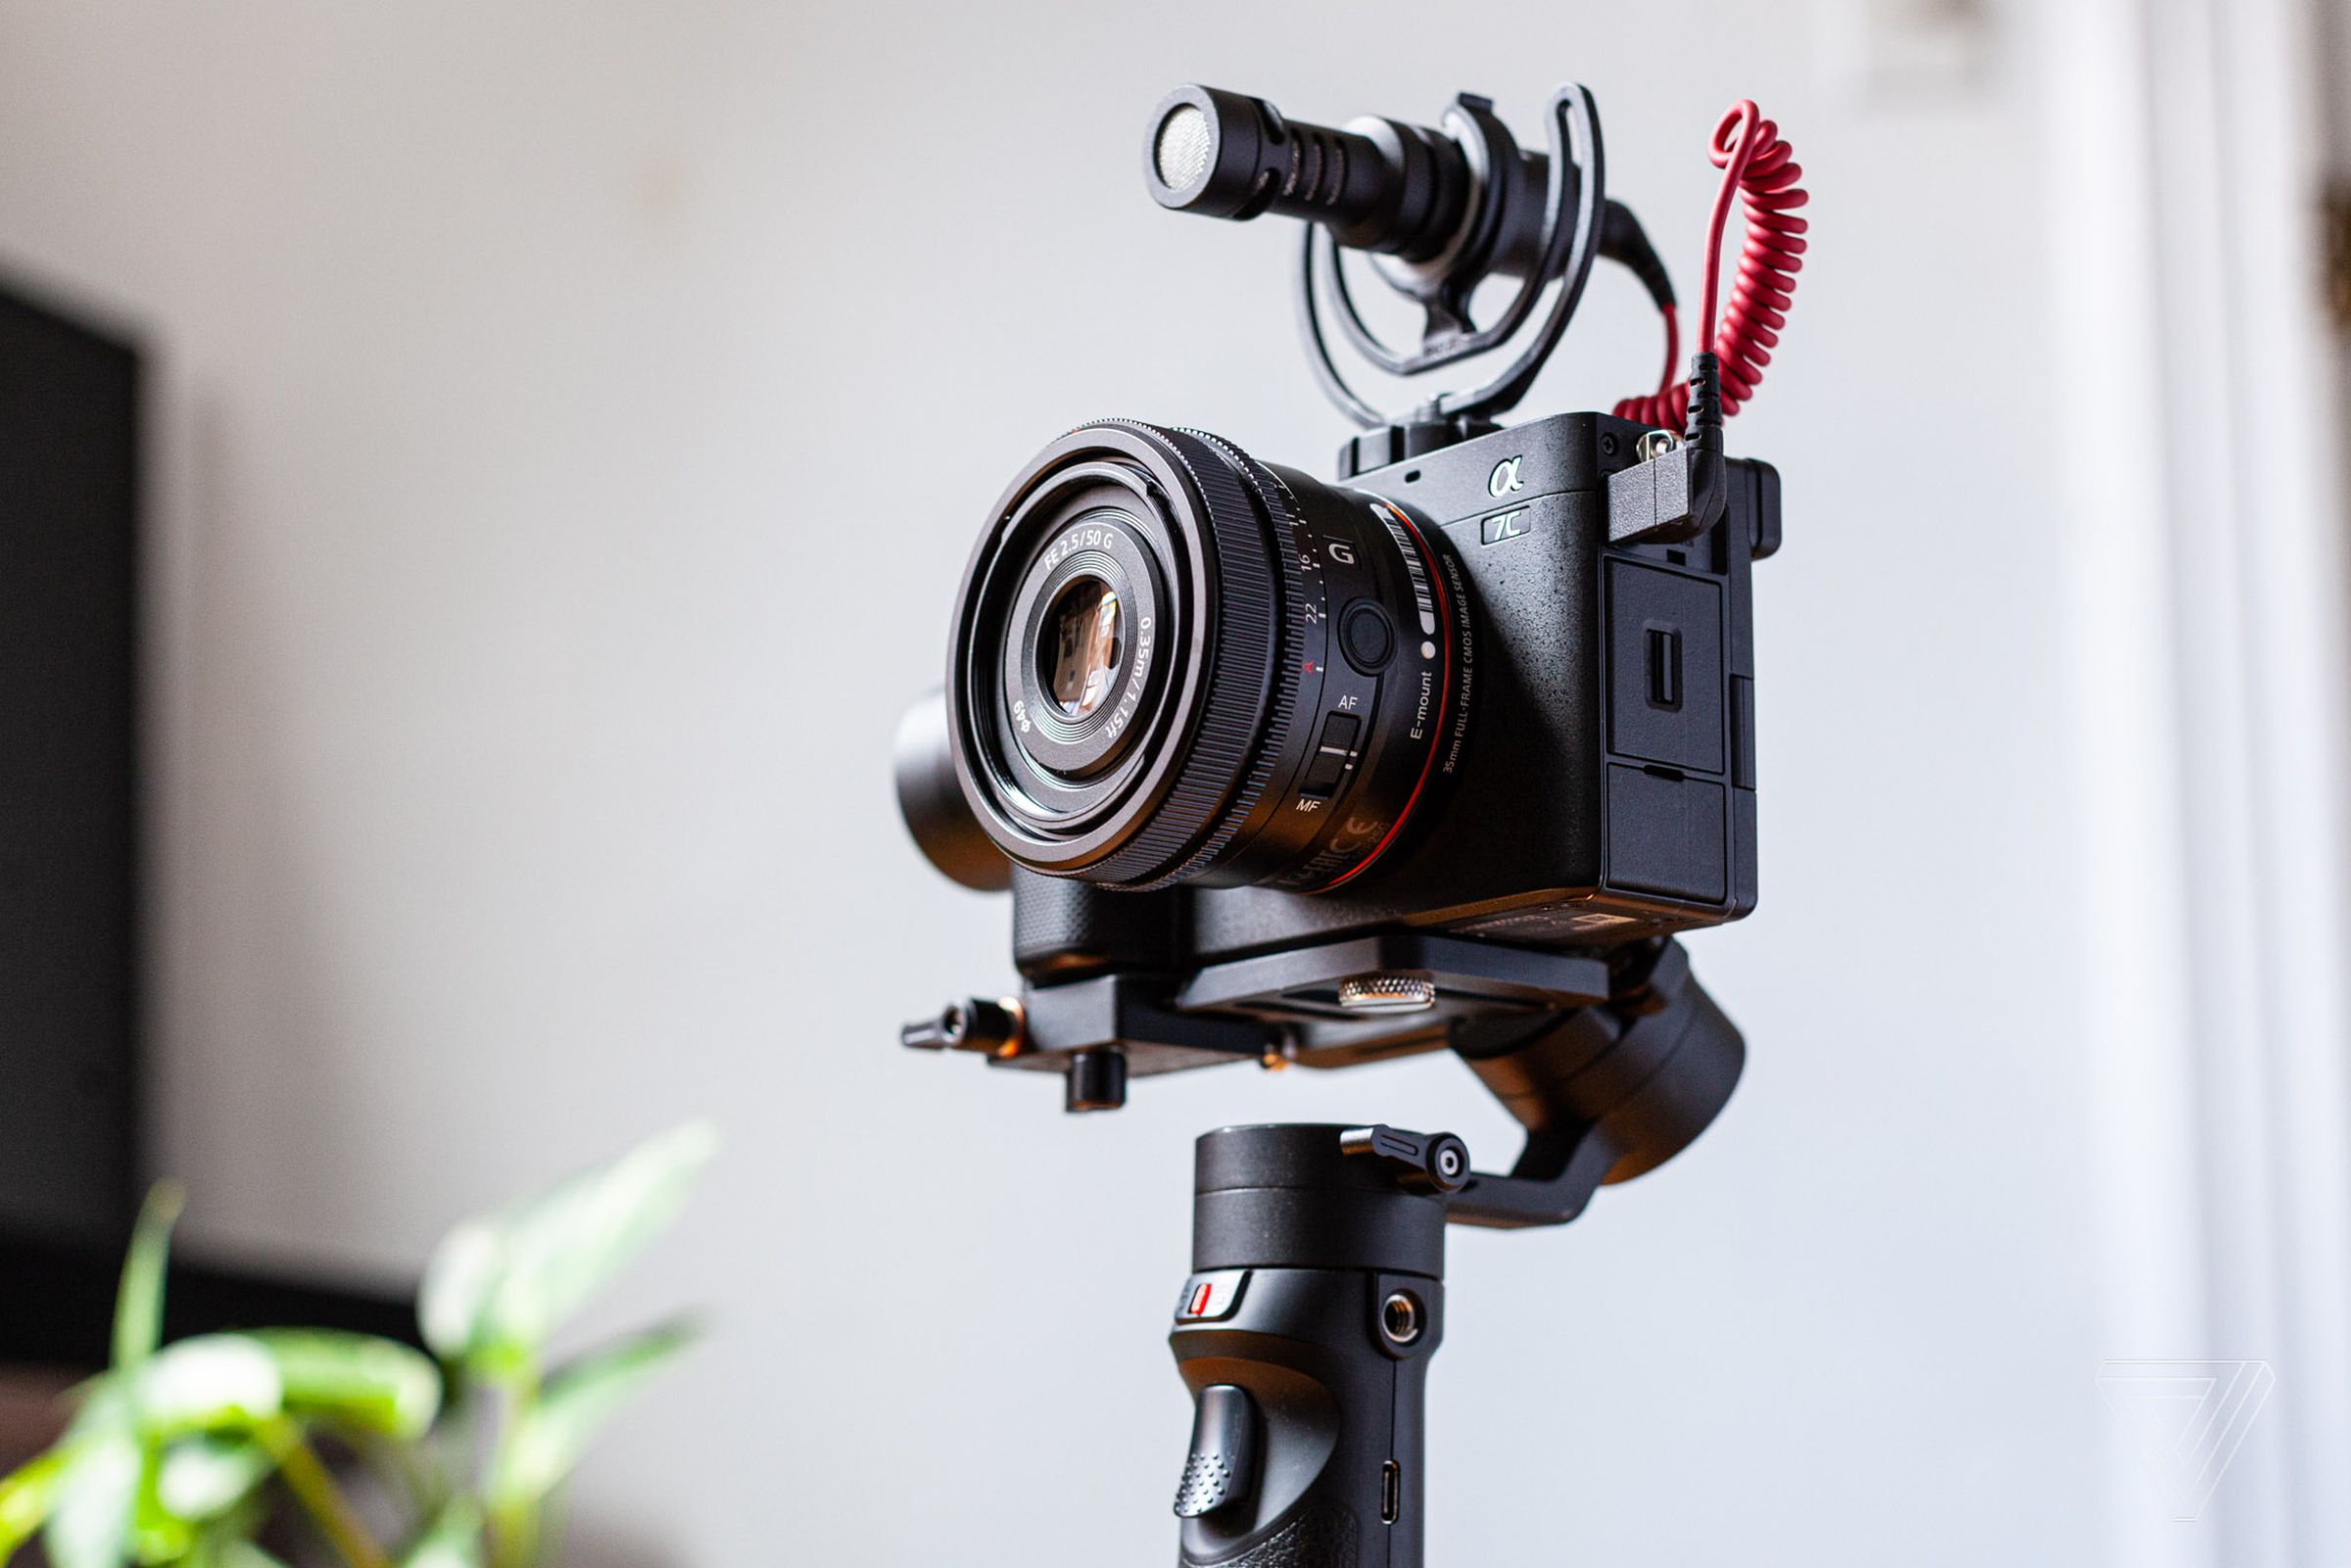 I was able to mount a shotgun mic onto my camera without going over the gimbal’s weight limit.